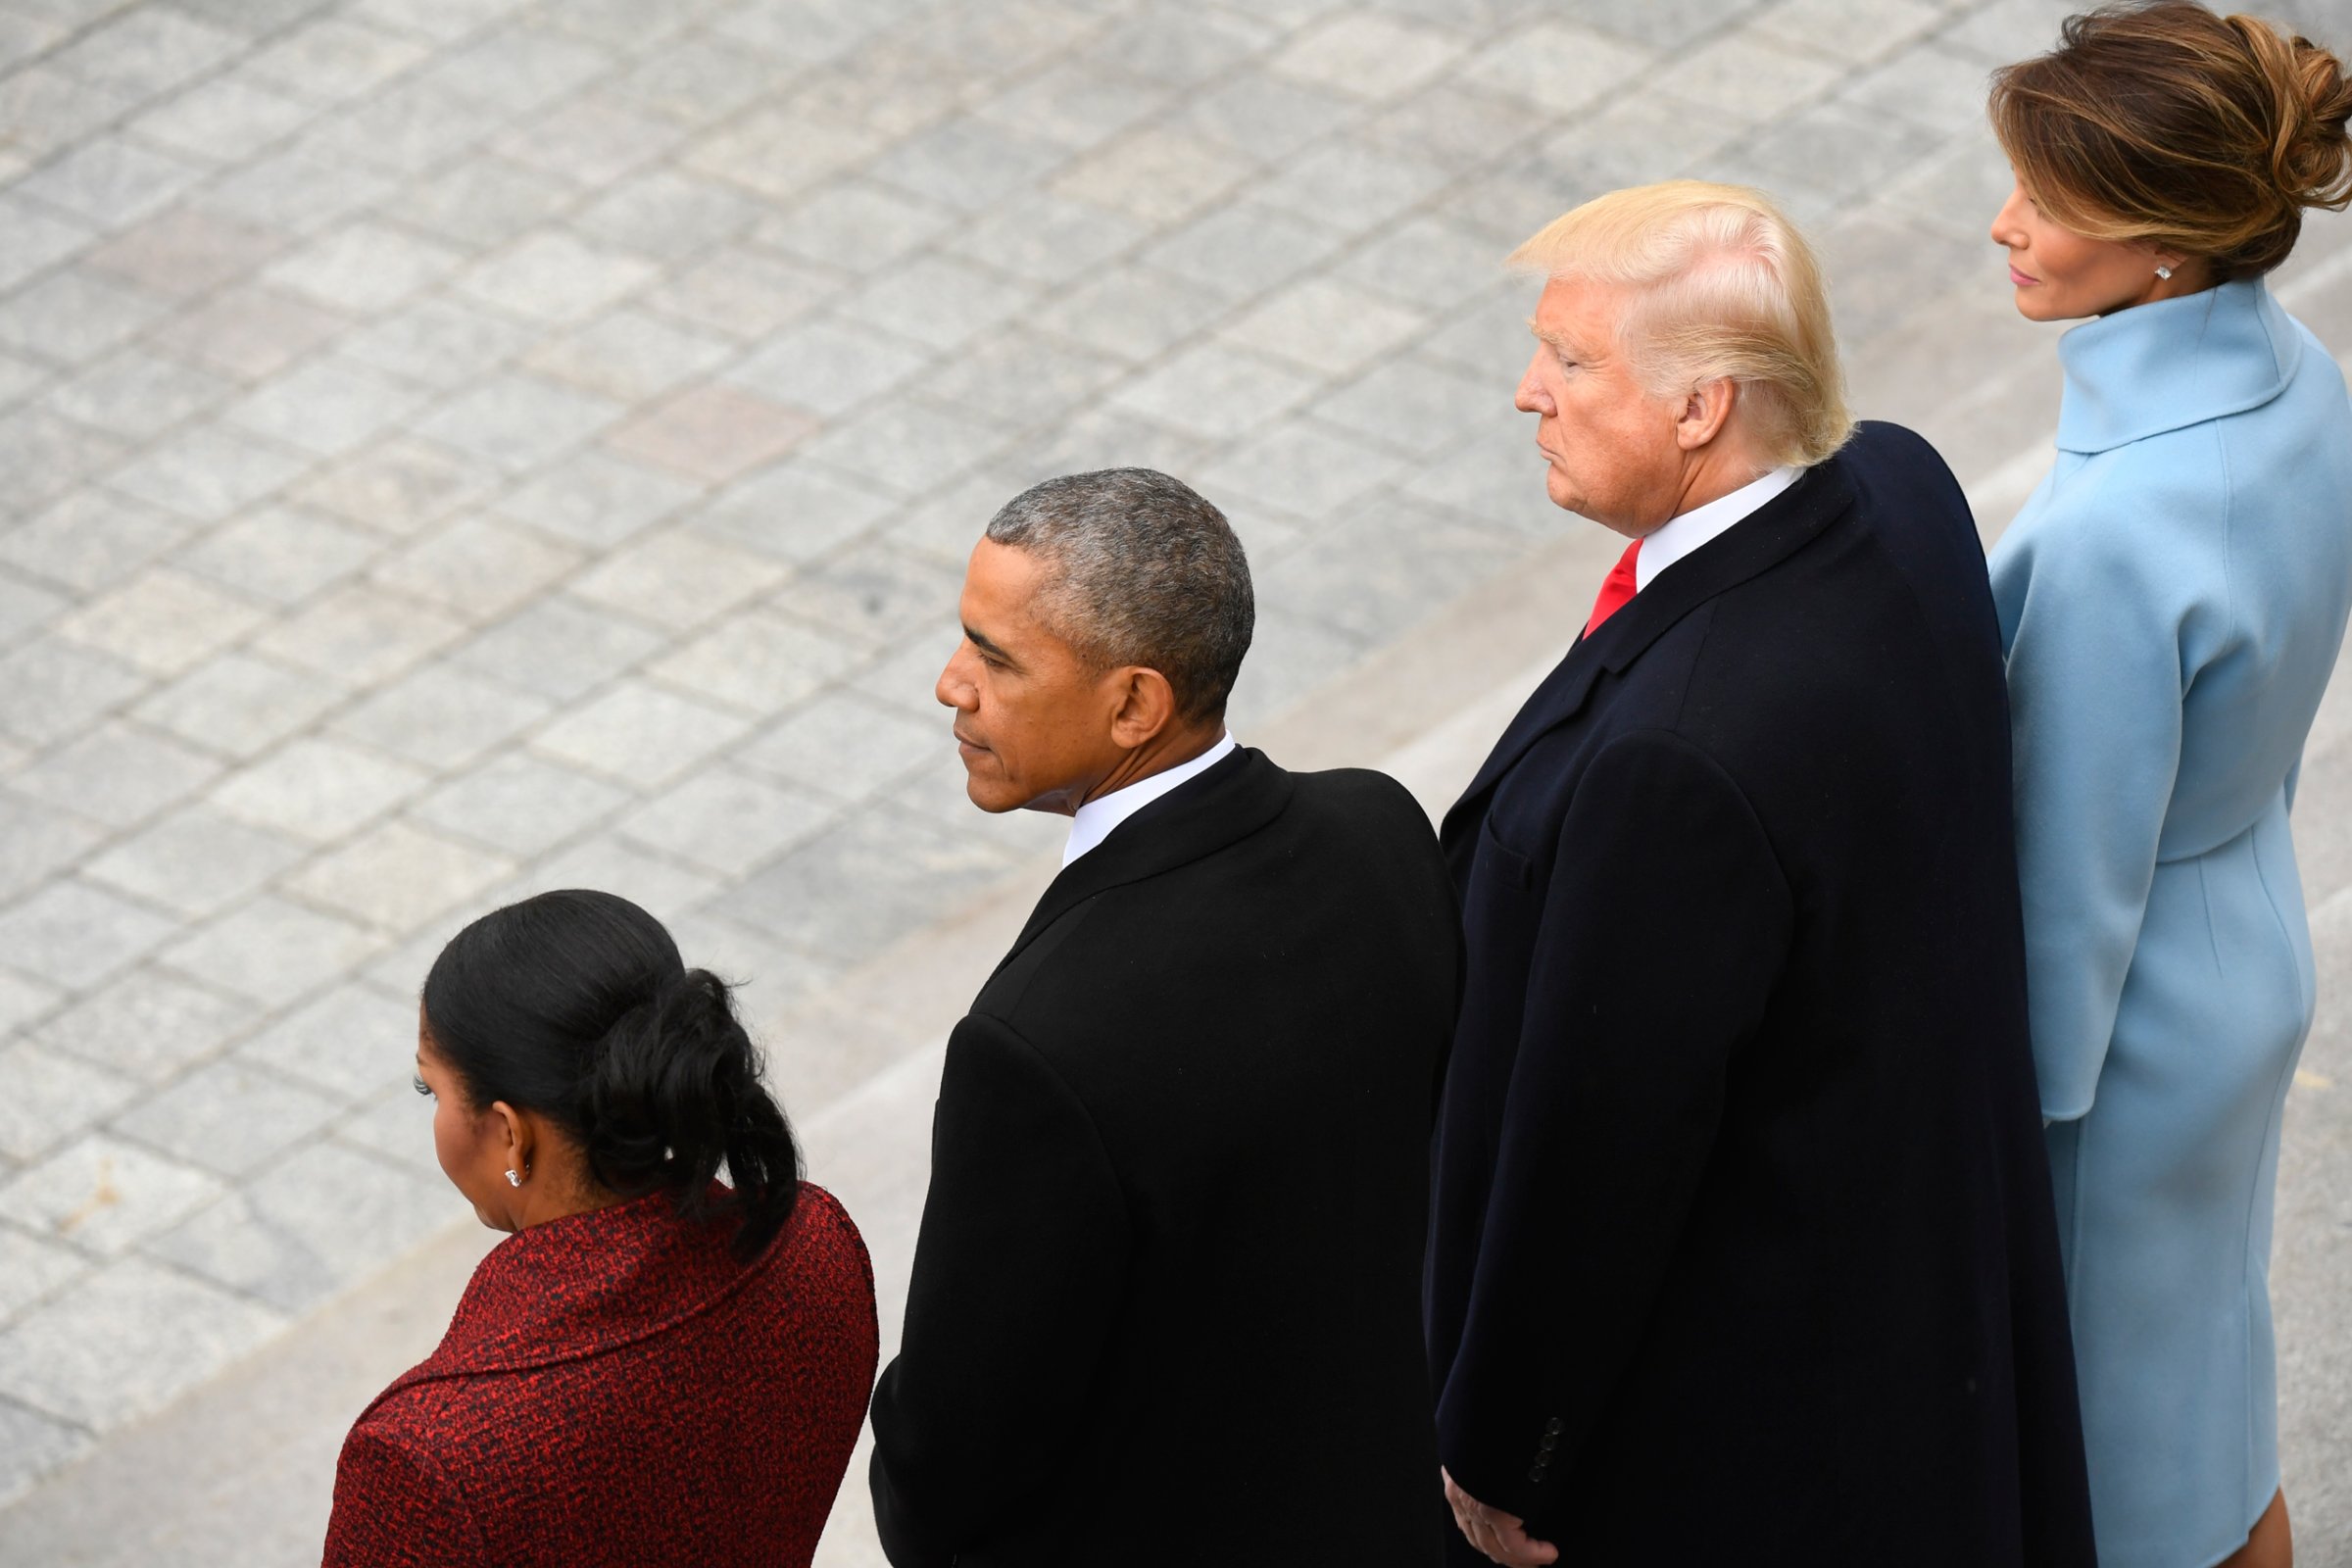 Former President Barack Obama and his wife Michelle Obama stand with President Donald Trump and his wife Melania Trump on the East front of the Capitol Hill in Washington, Friday, Jan. 20, 2017, prior to the Obama's departure from the presidential inauguration . (Jack Gruber/Pool Photo via AP)